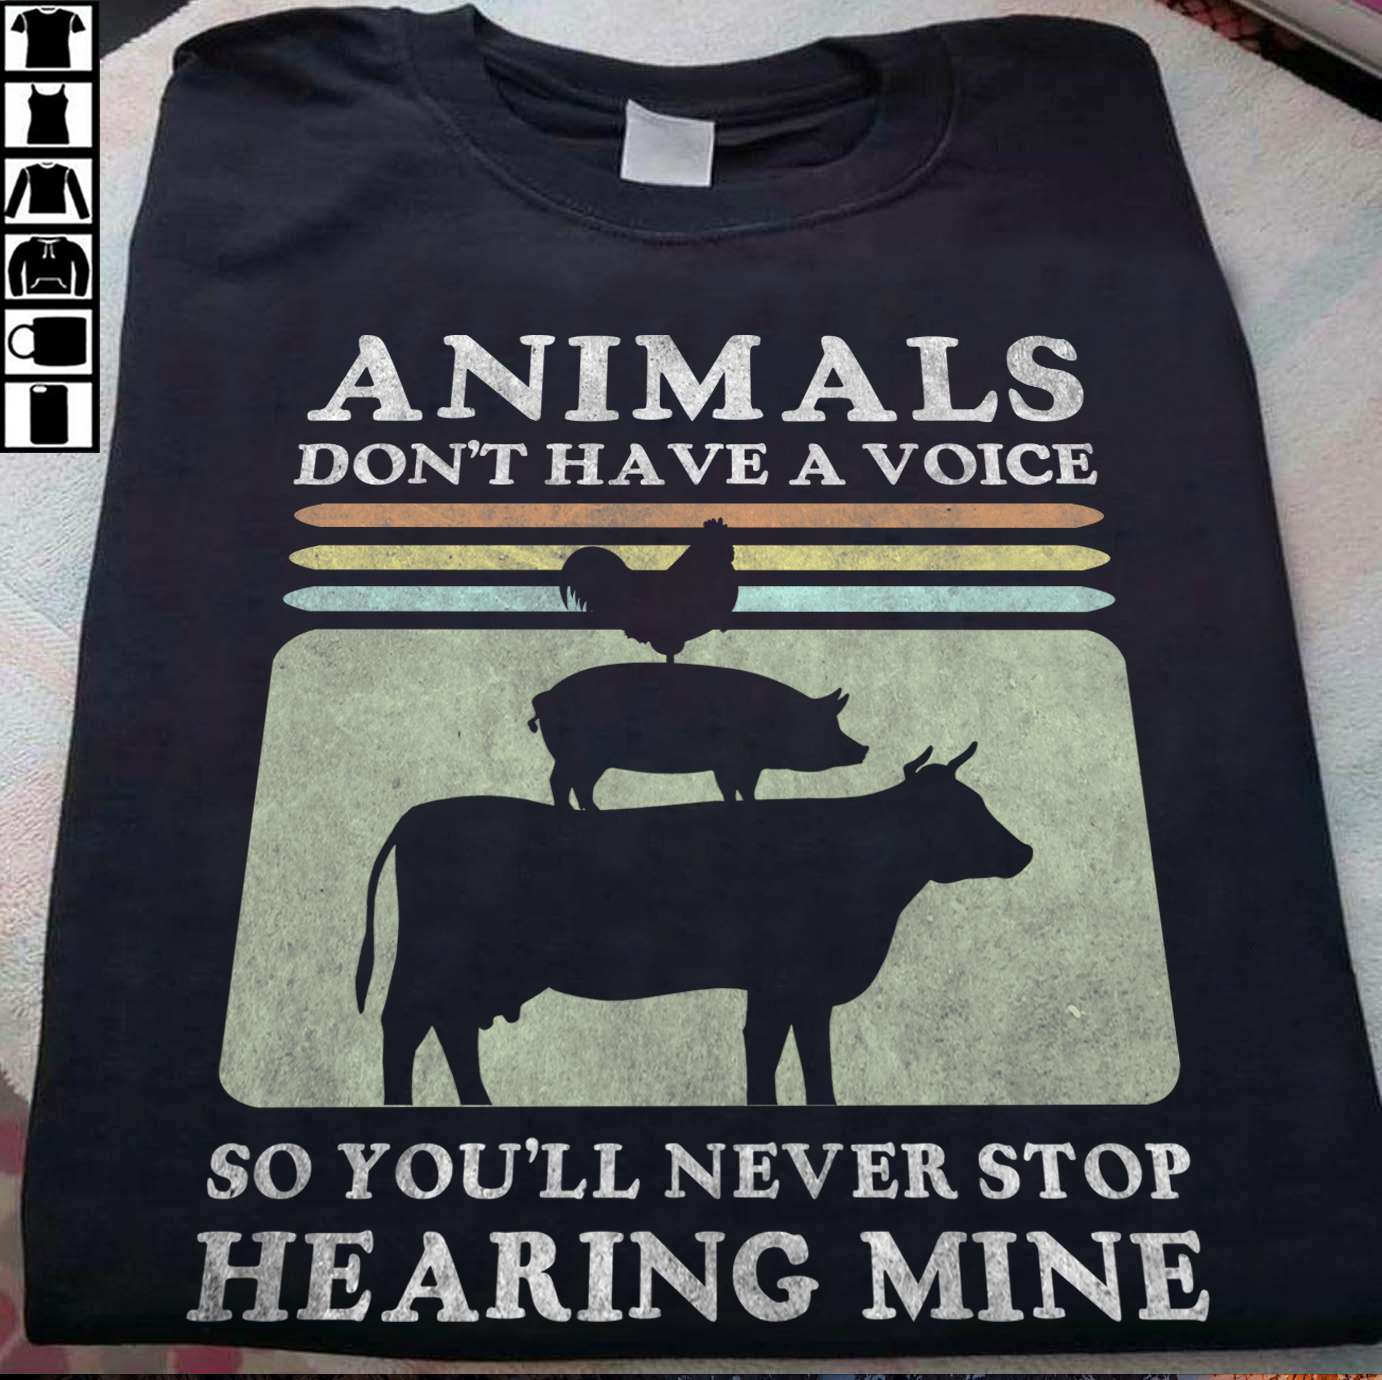 Animals don't have a voice so you'll never stop hearing mine - Animal lover